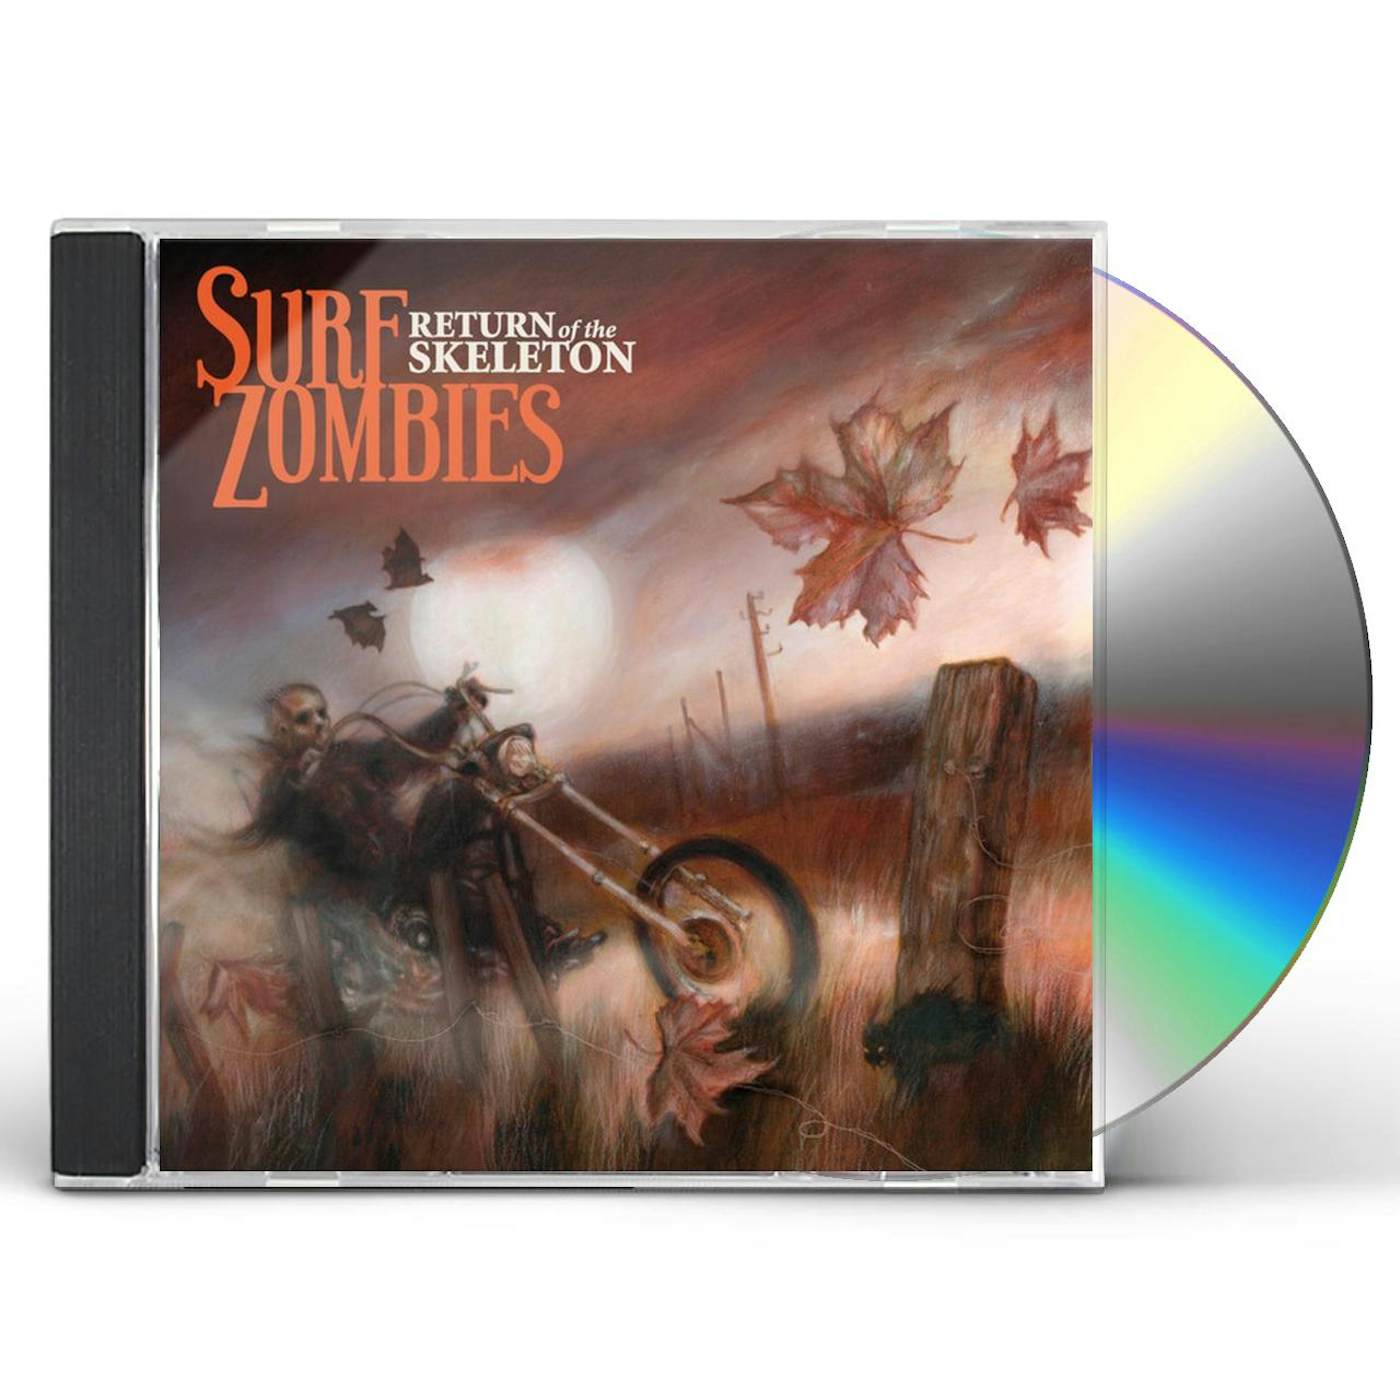 The Surf Zombies RETURN OF THE SKELETON CD